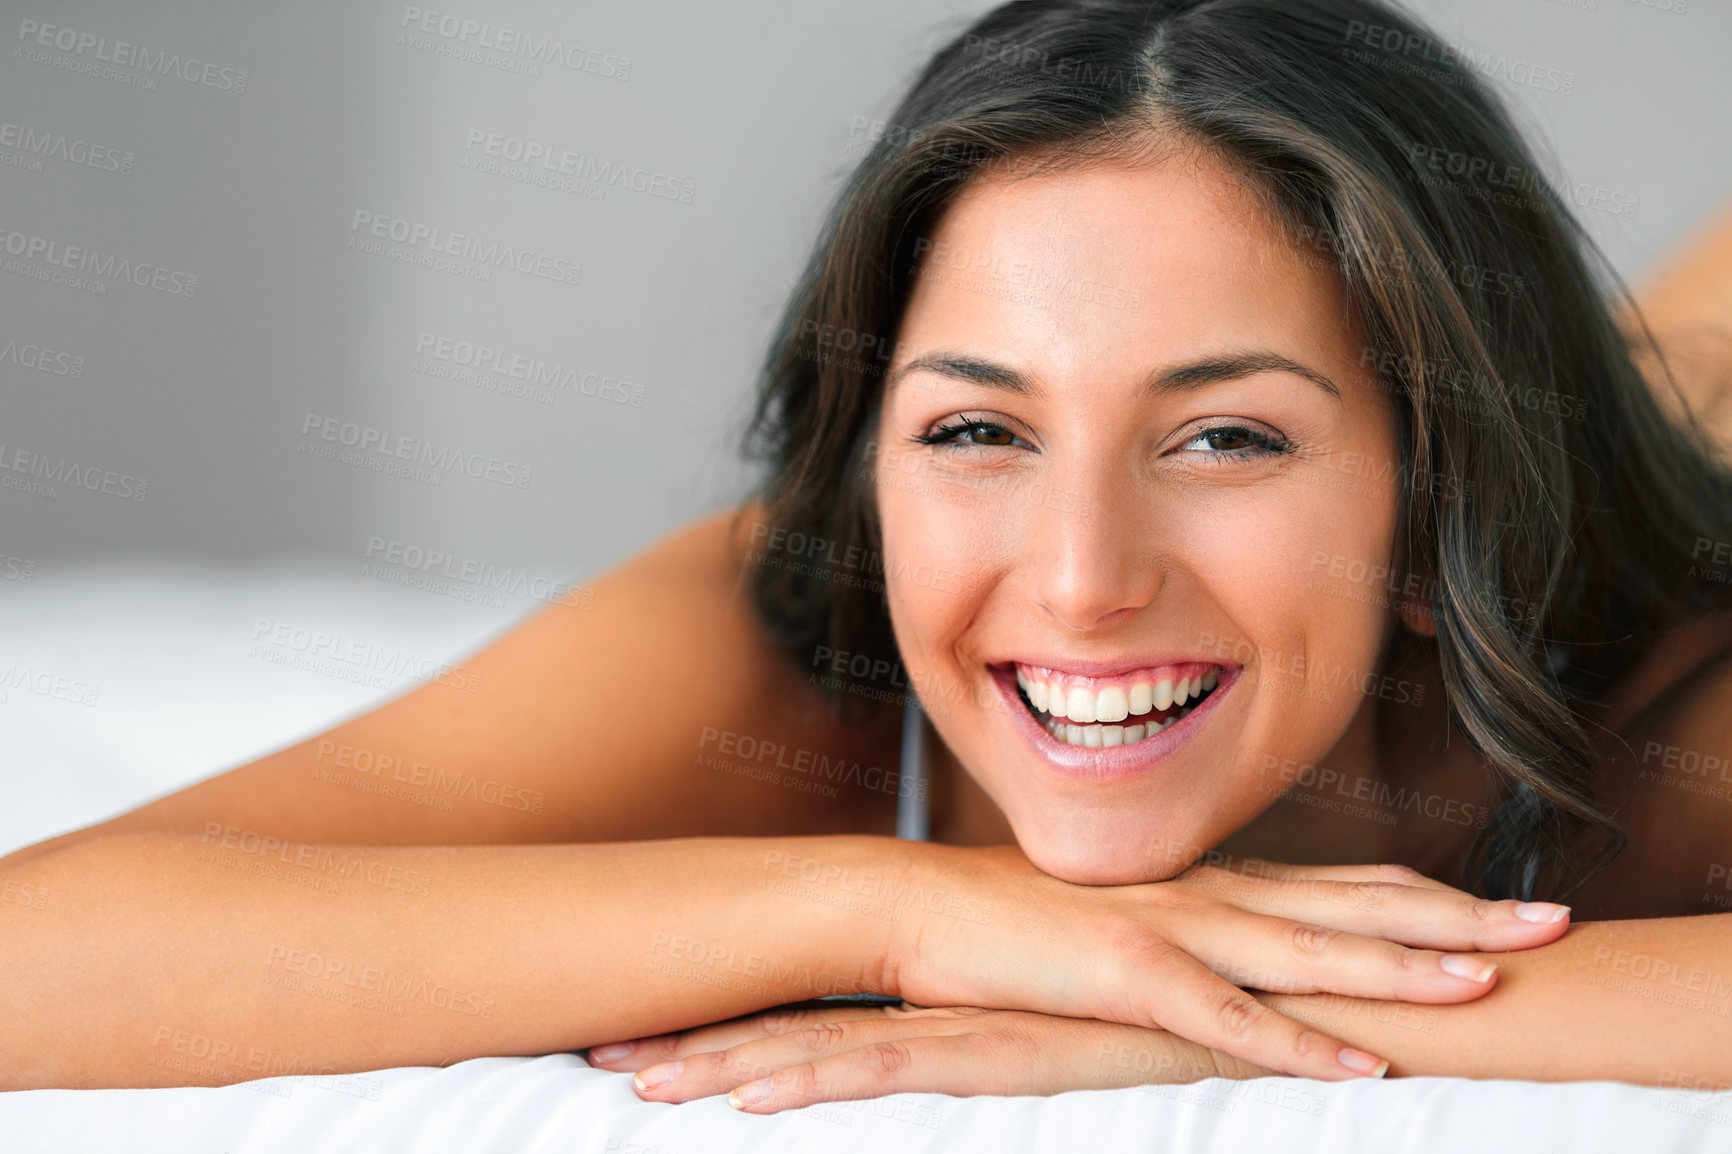 Buy stock photo Shot of a beautiful young woman relaxing on her bed